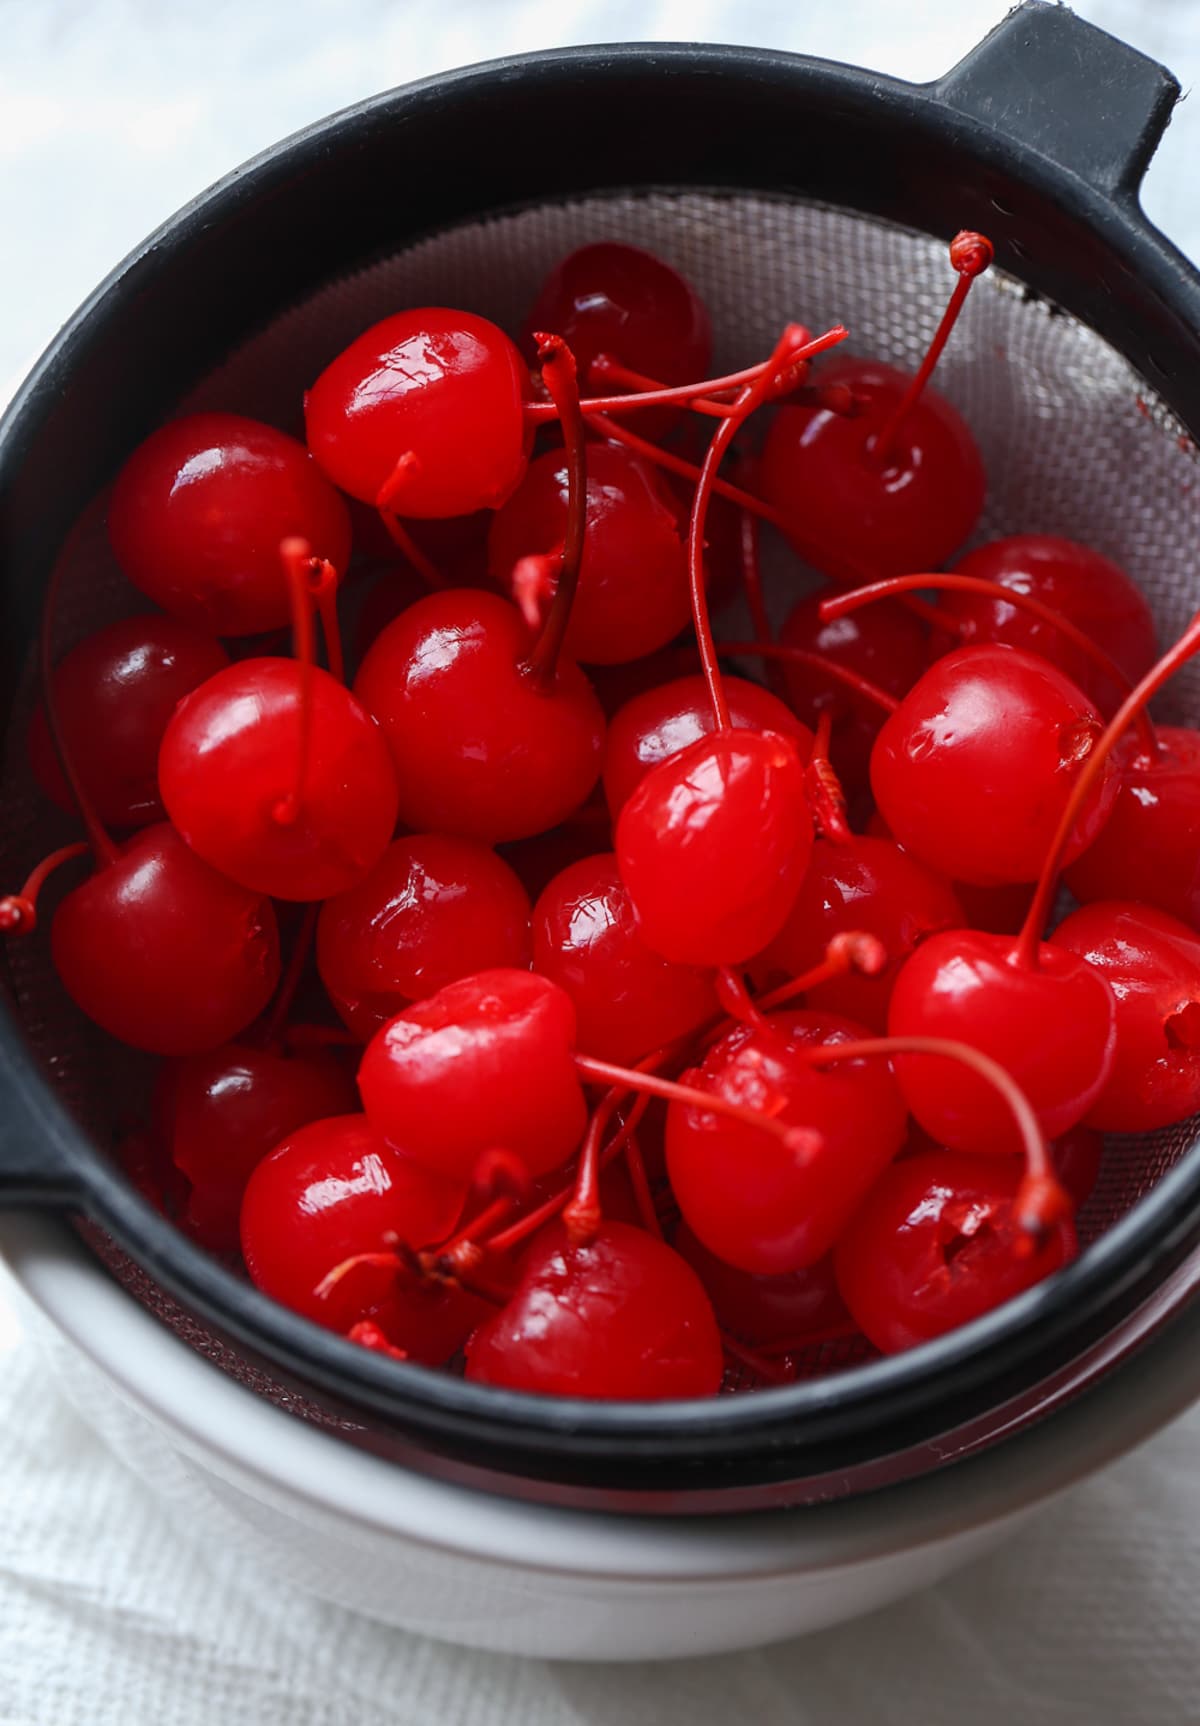 A bowl of Maraschino cherries with stems